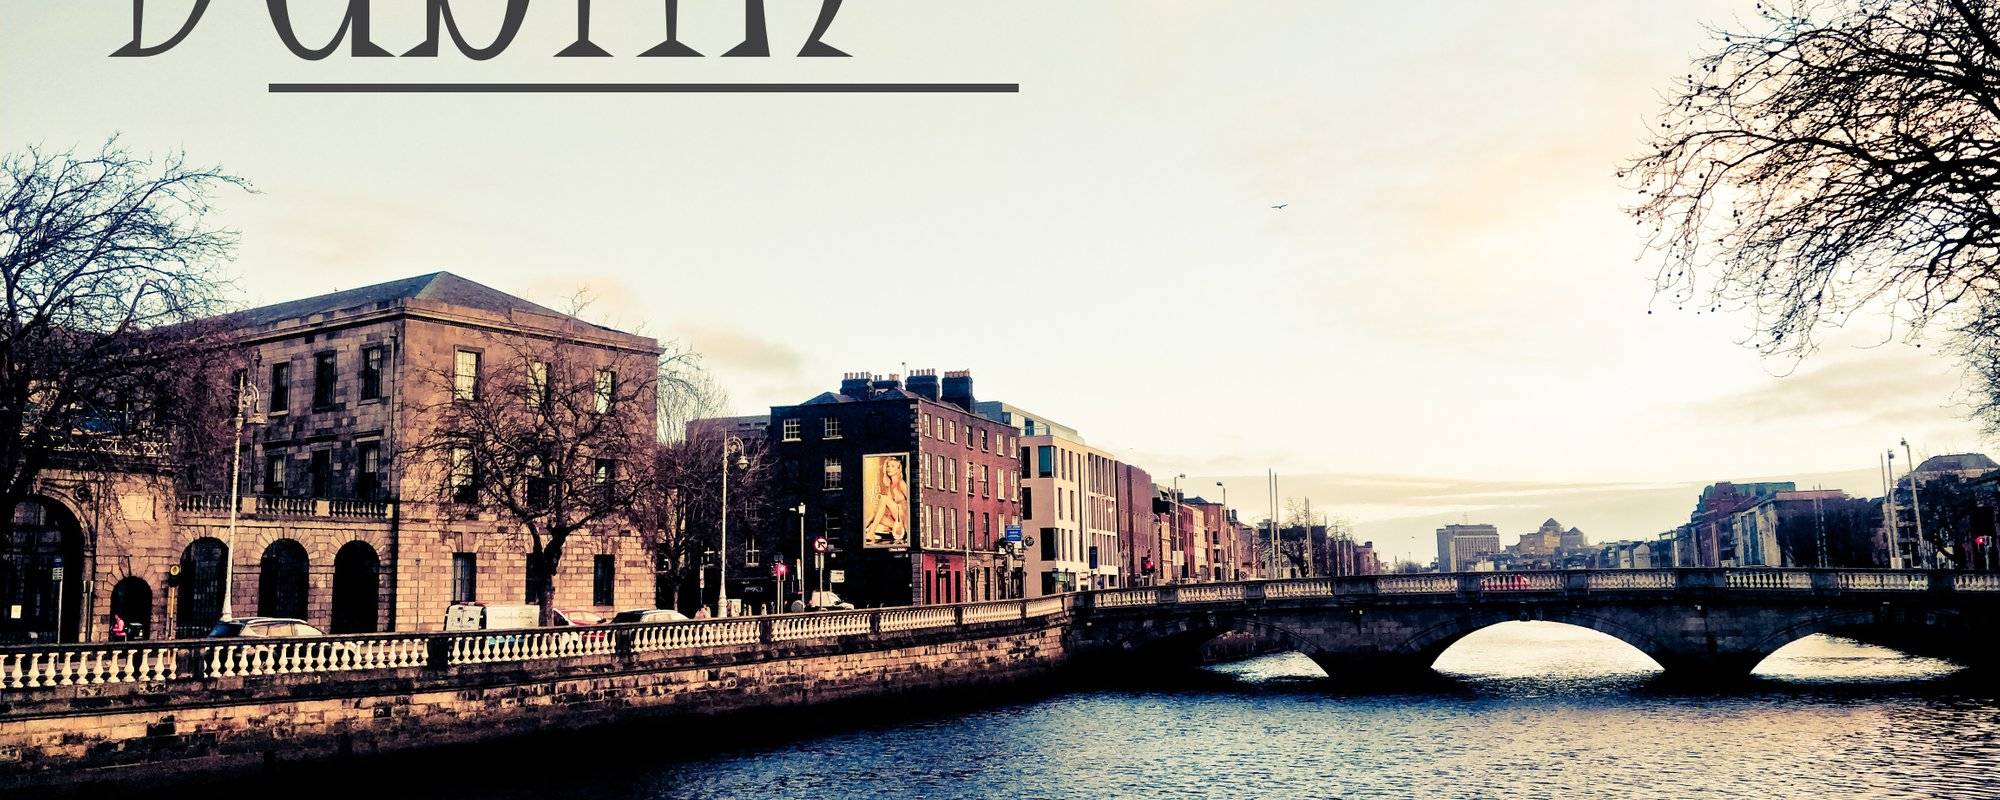 DUBLIN - the place you WANT to come to